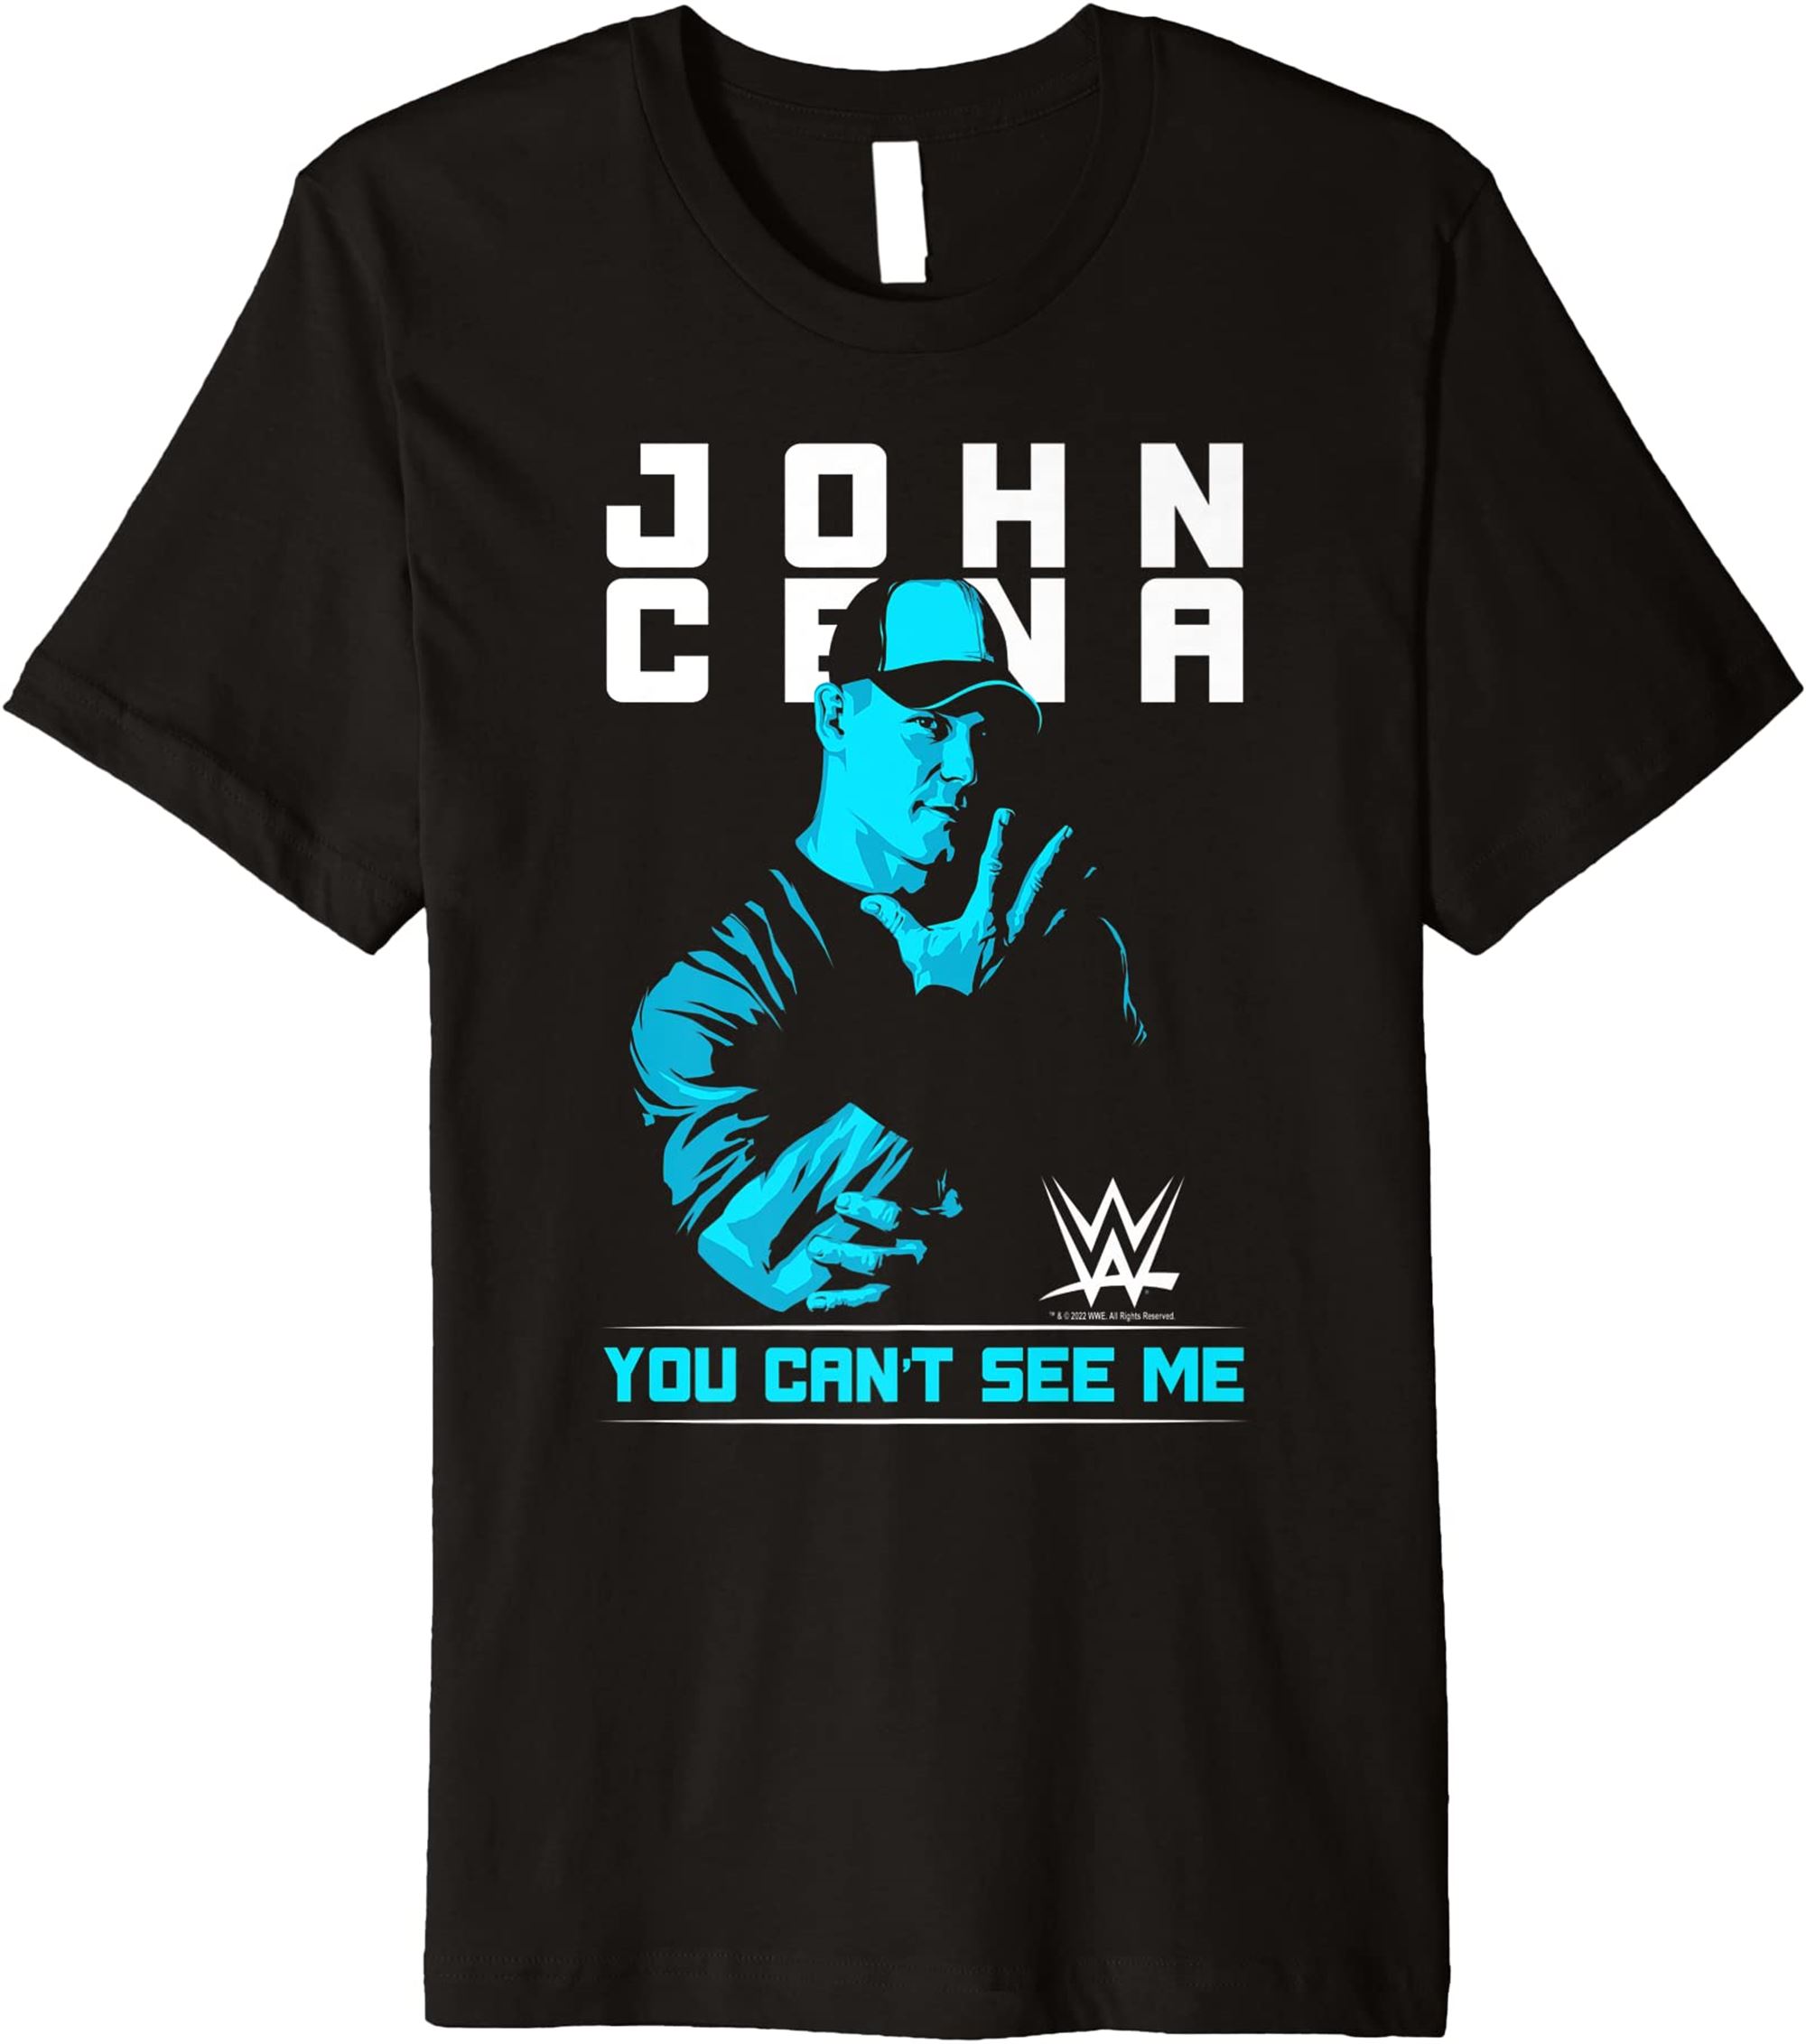 Wwe John Cena You Cant See Me Premium T-shirt Full Size Up To 5xl